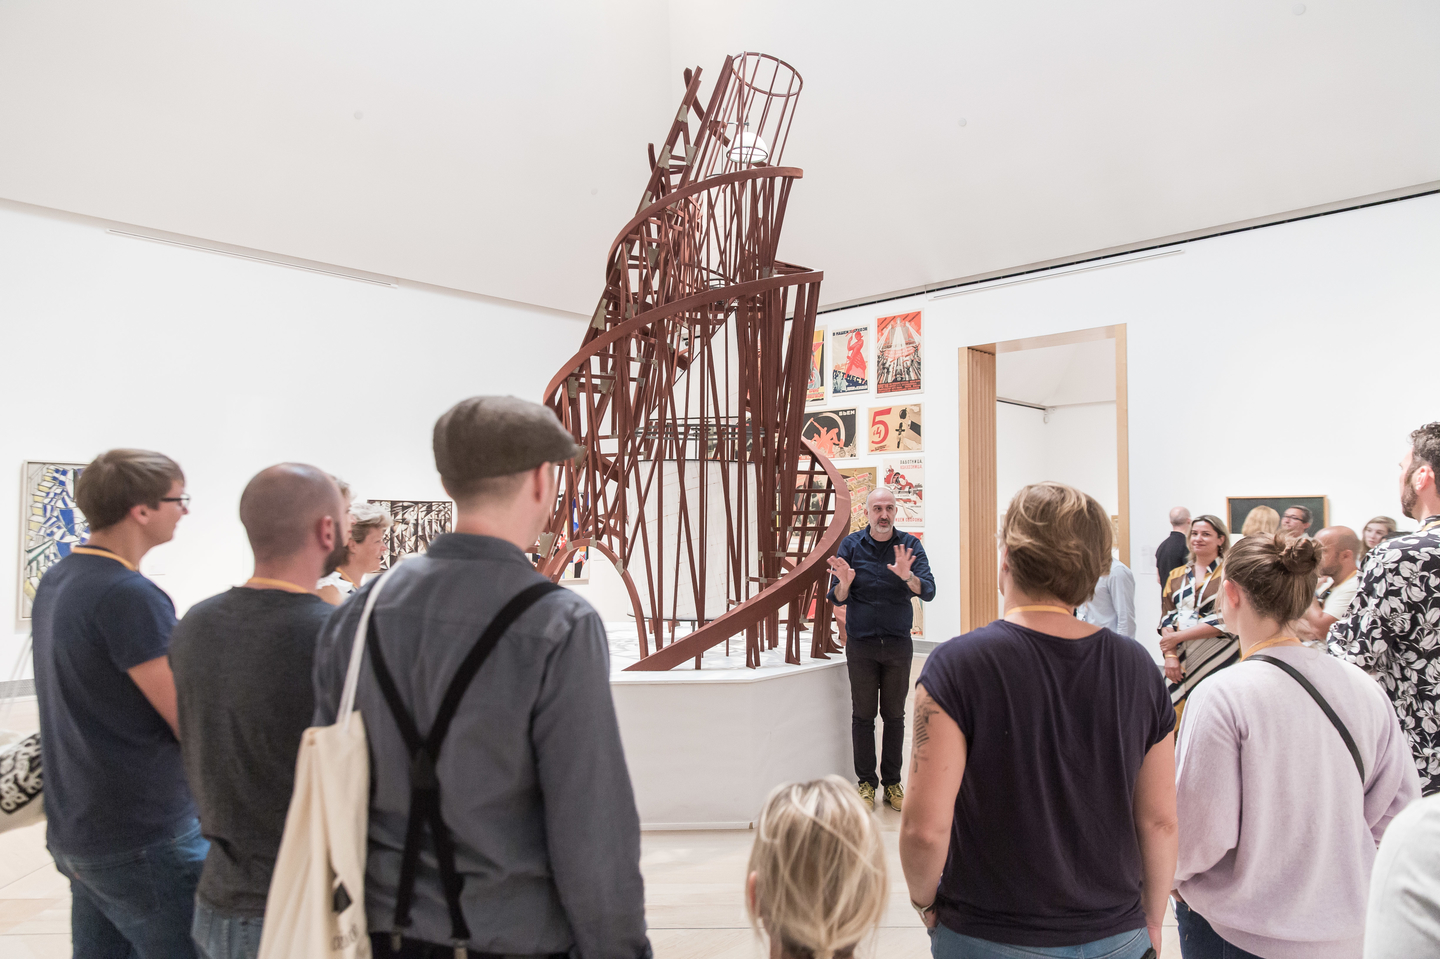 During Exploration Day's Art & Architecture program, registrants enjoyed a guided tour of the Moderna Museet. Photo by Markus Nass/Daimler AG